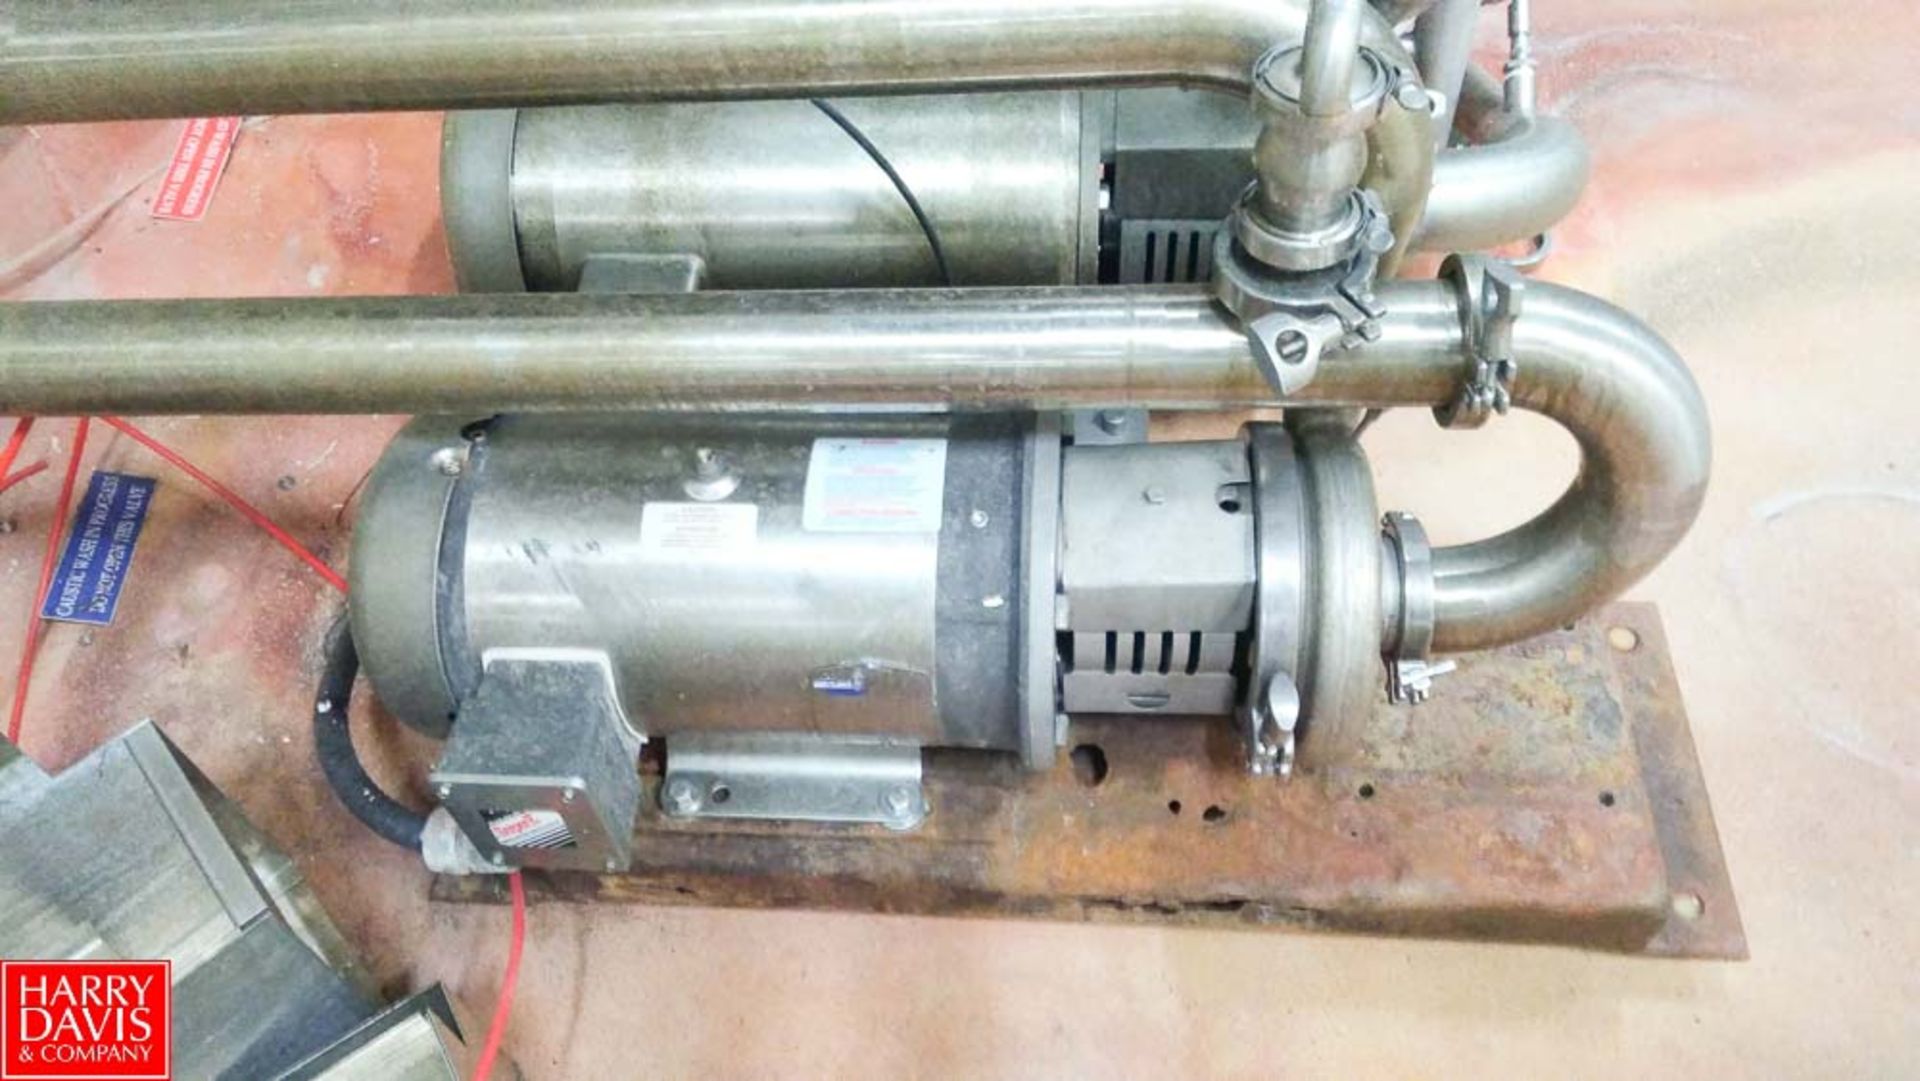 Tri Clover Centrifugal Pump, With S/S Clad Motor And S/S Head  Rigging: $75